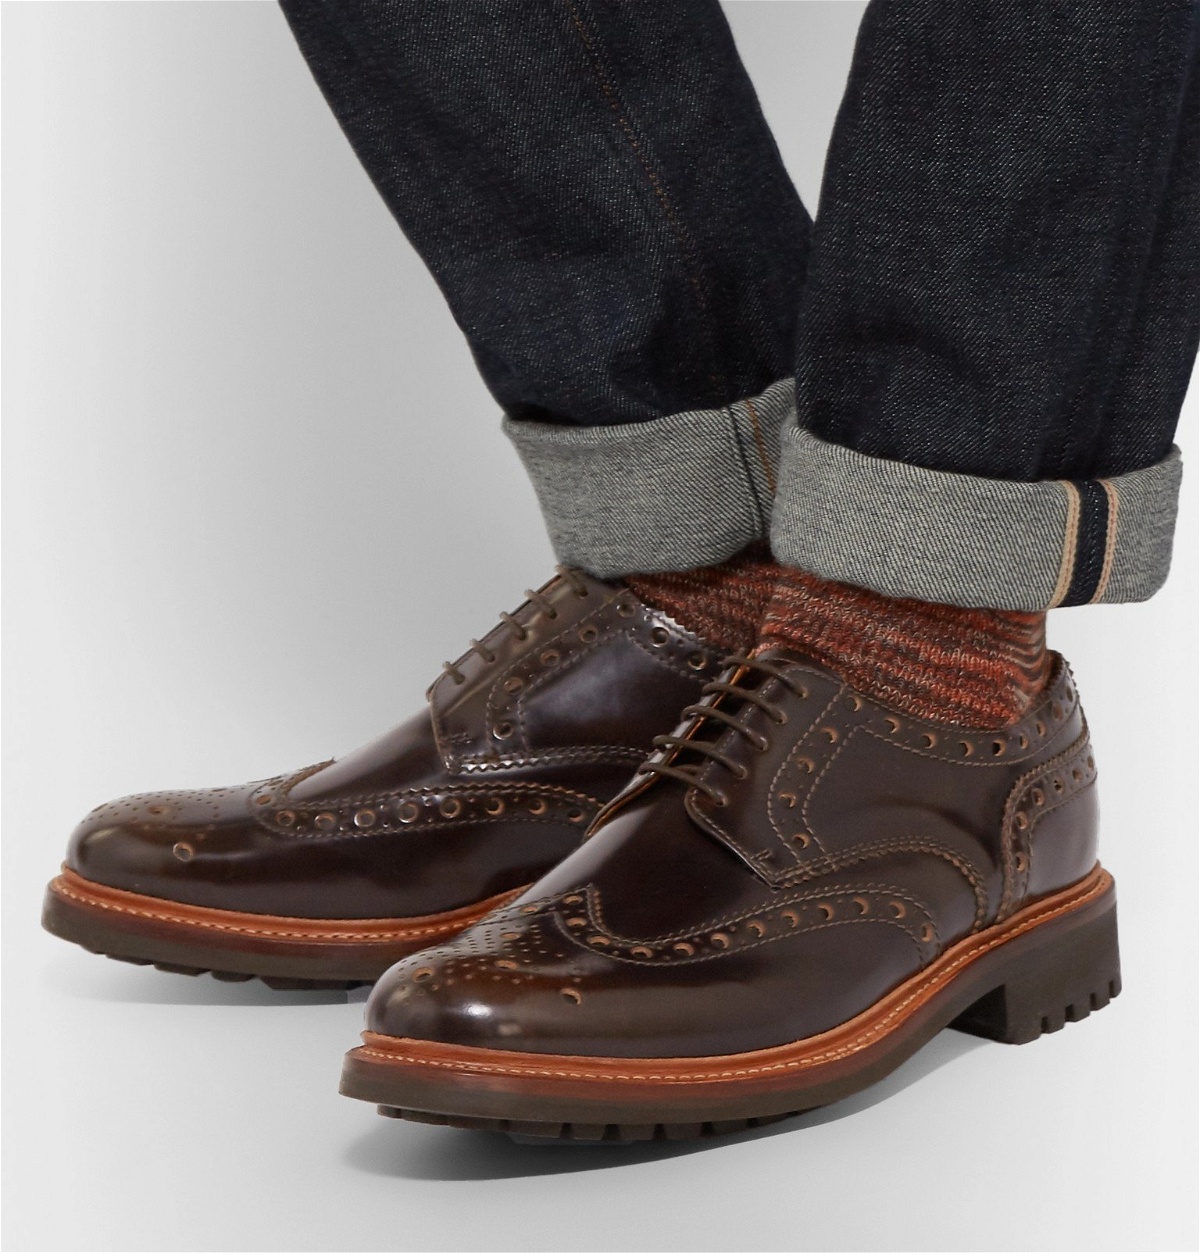 Grenson - Archie Leather Wingtip Brogues - Brown Grenson